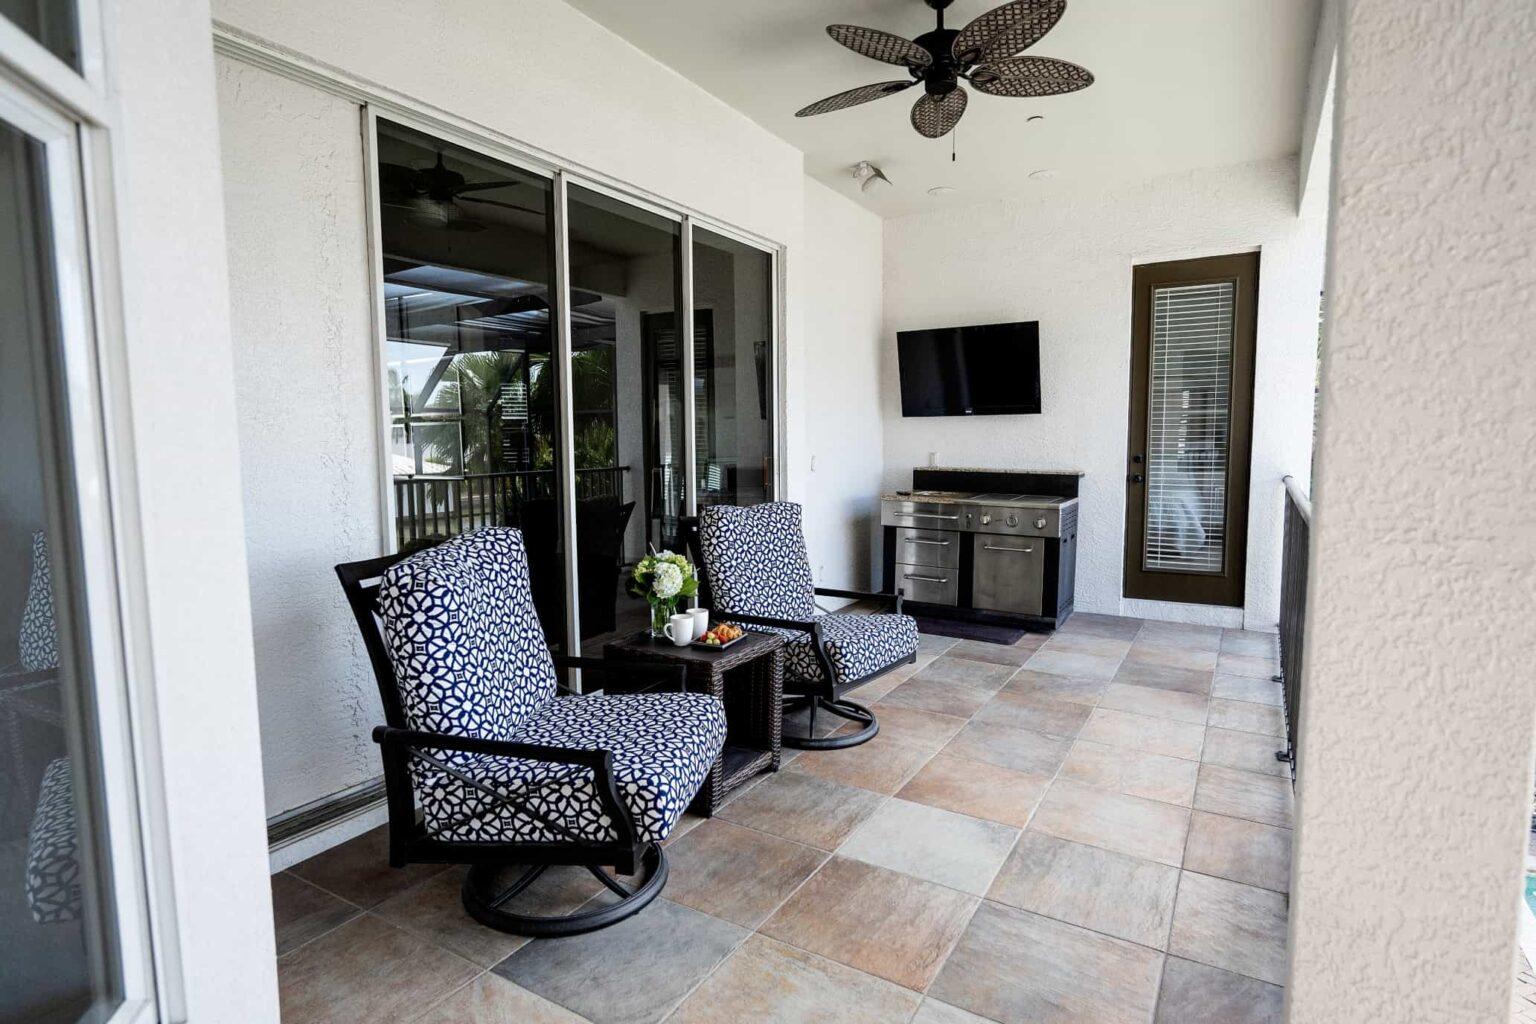 naples fl vacation home Main floor wraparound screened lanai - glass doors fully open, tv, and gas grill.